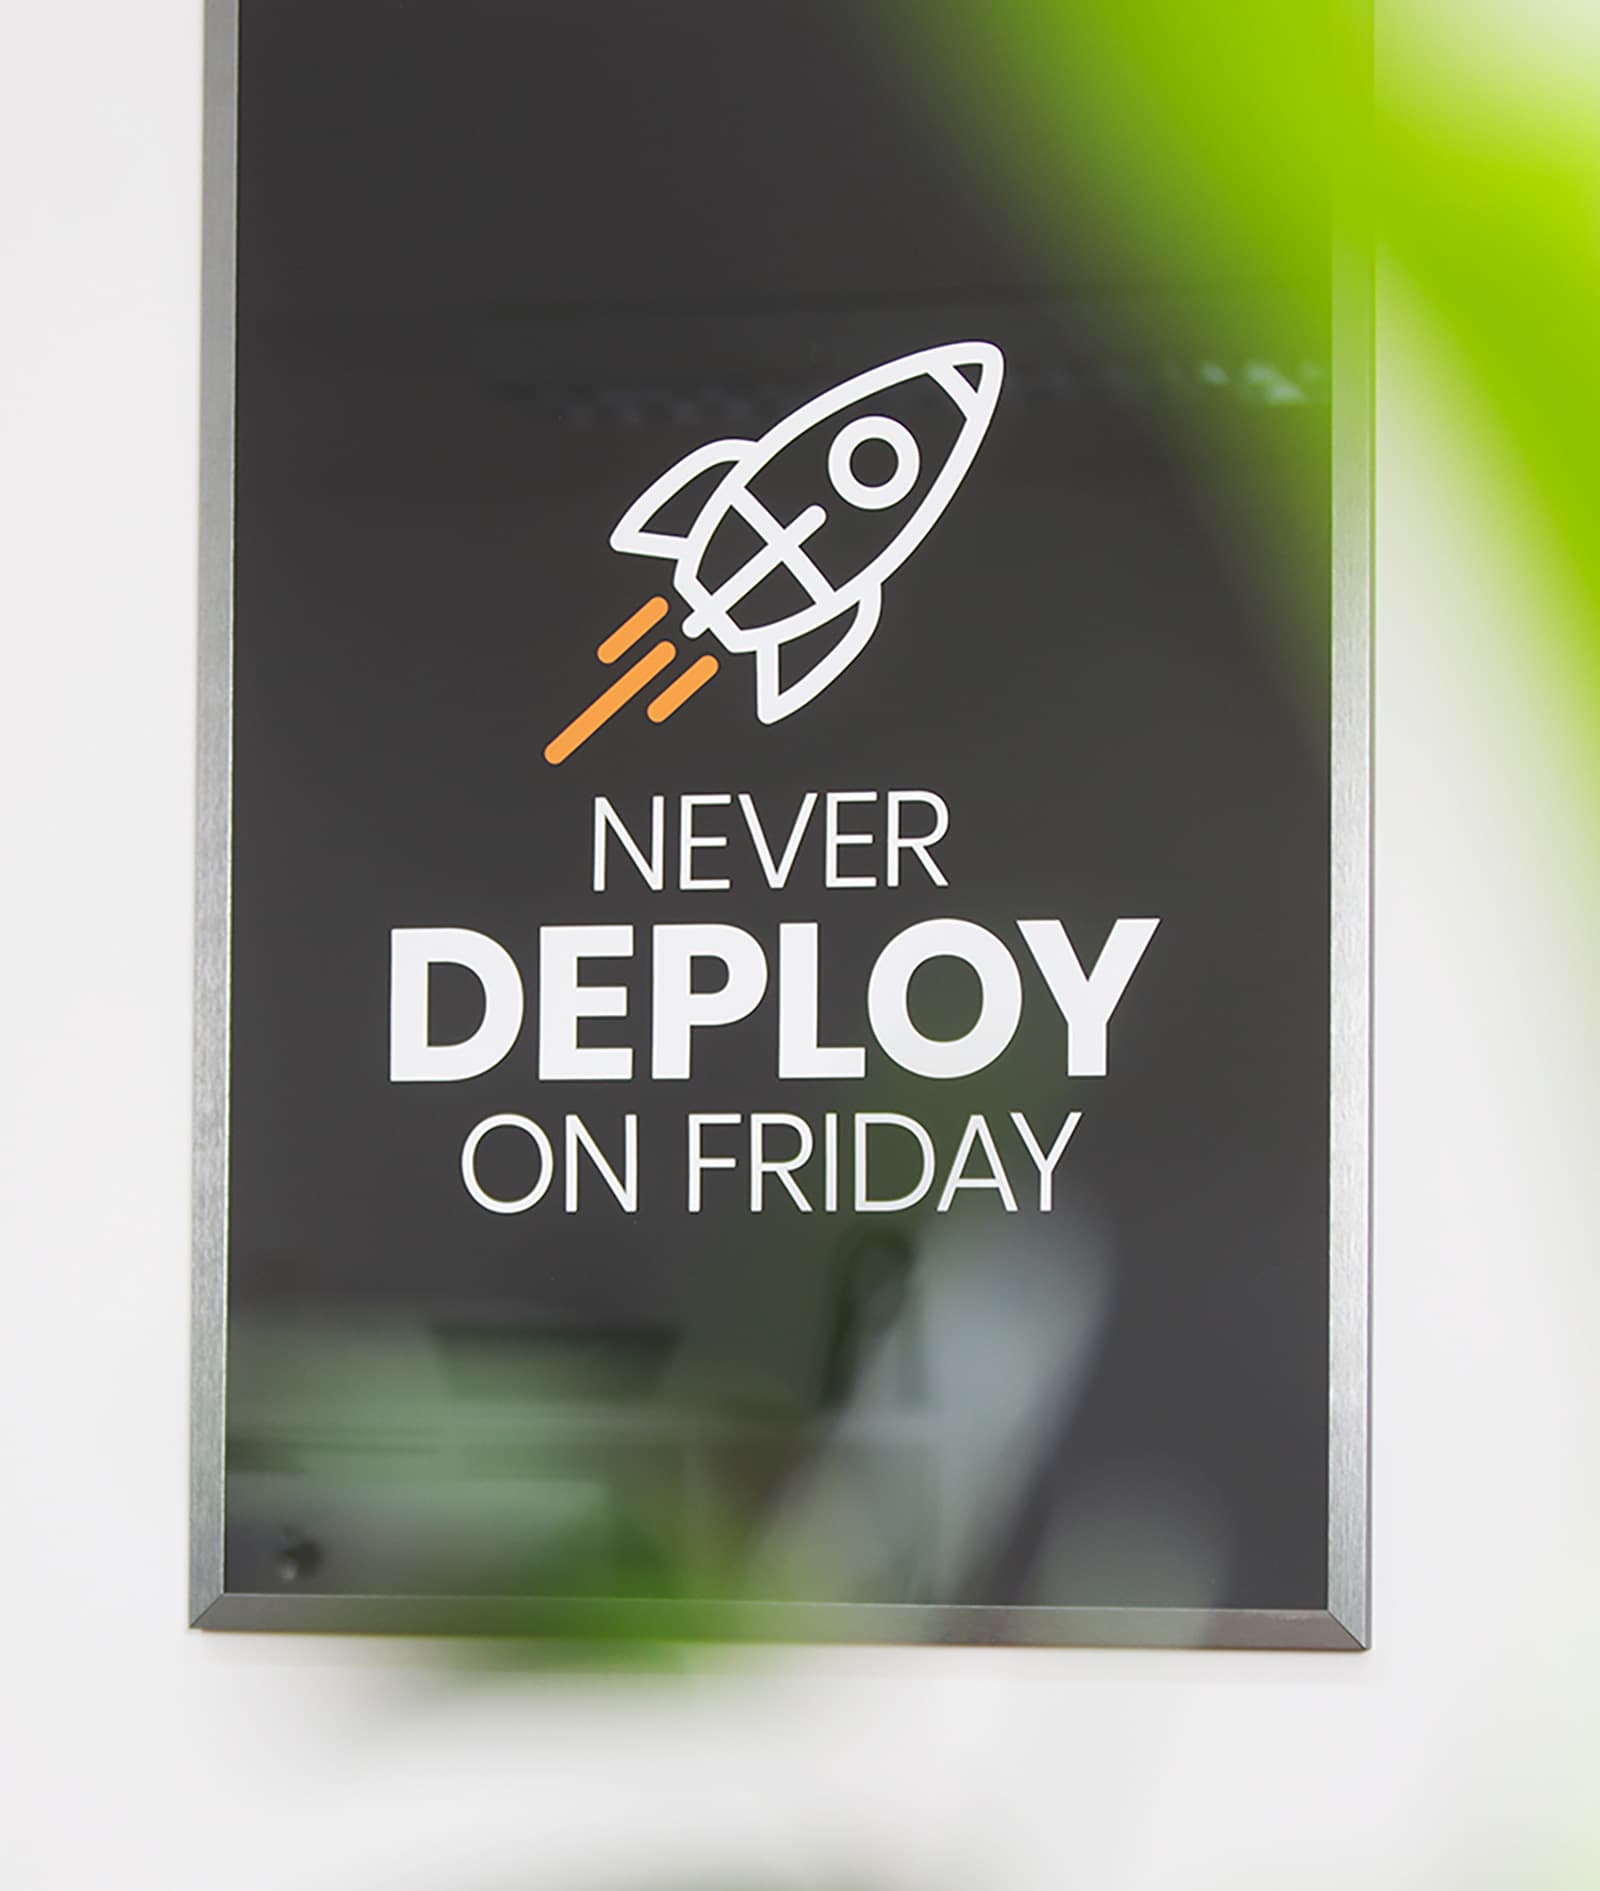 Never deploy on friday